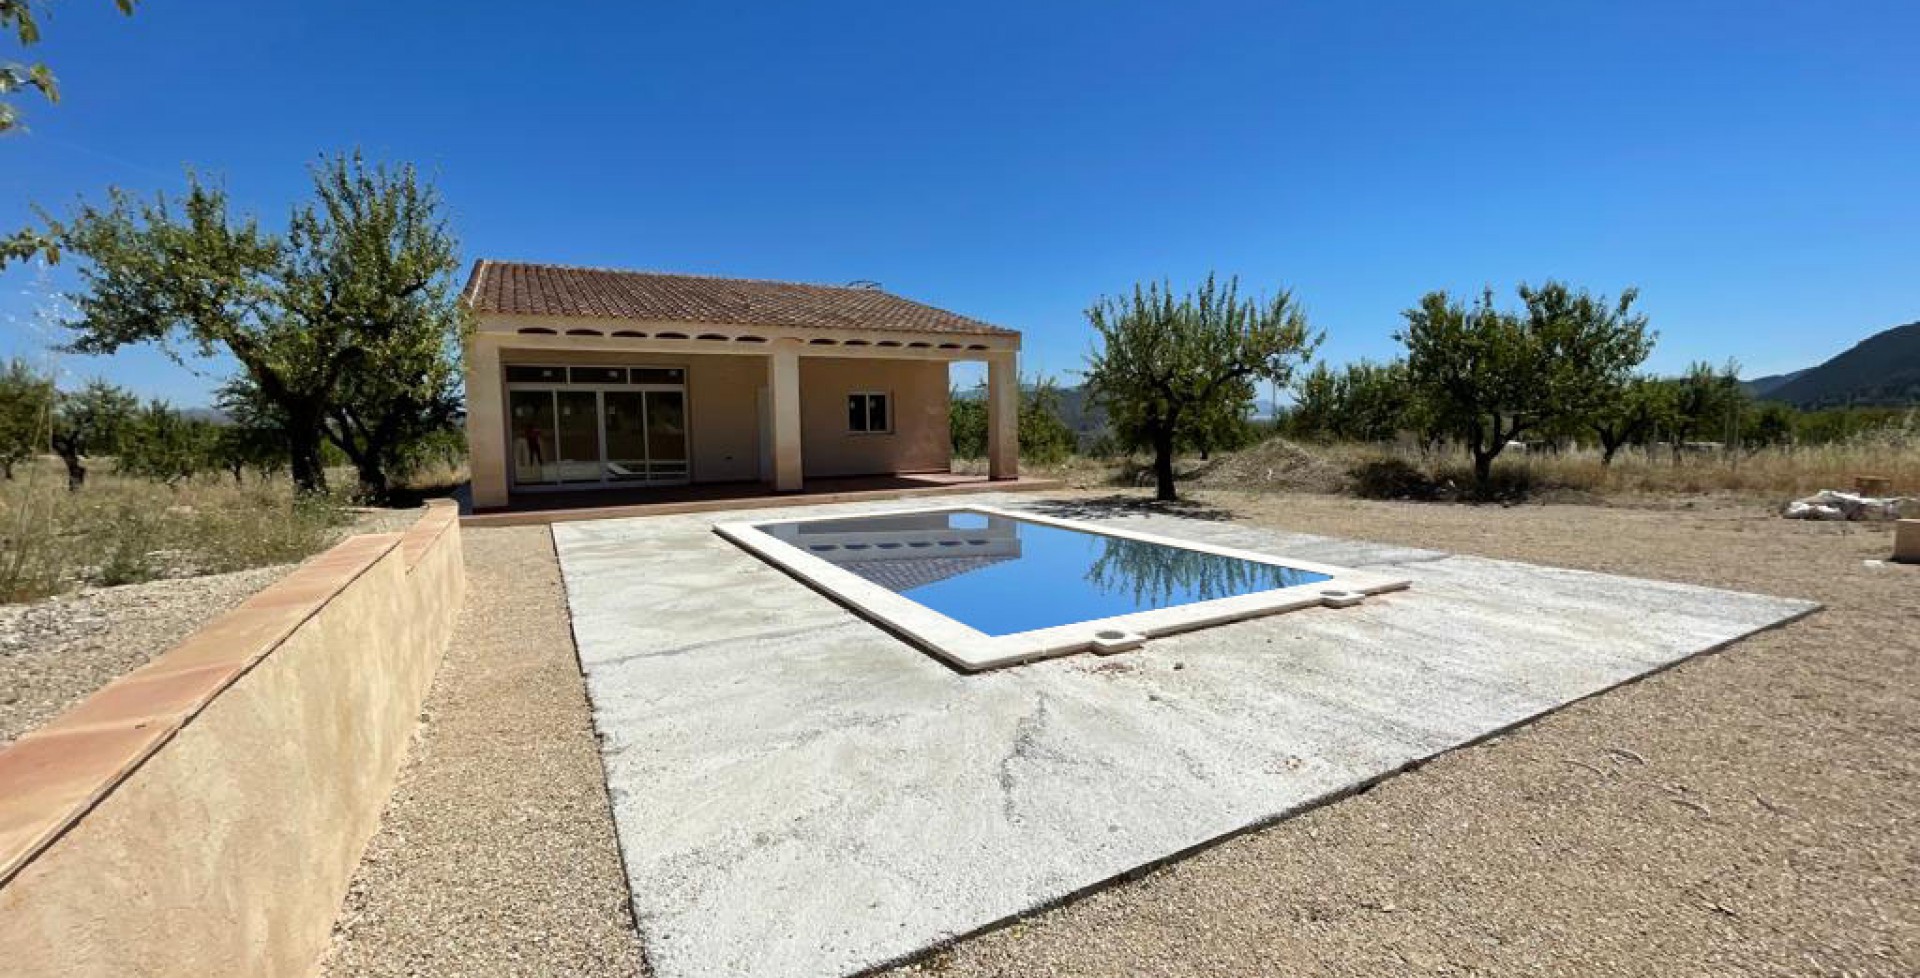 New building villa with a beautiful swimming pool, Ricote, Murcia, Spain